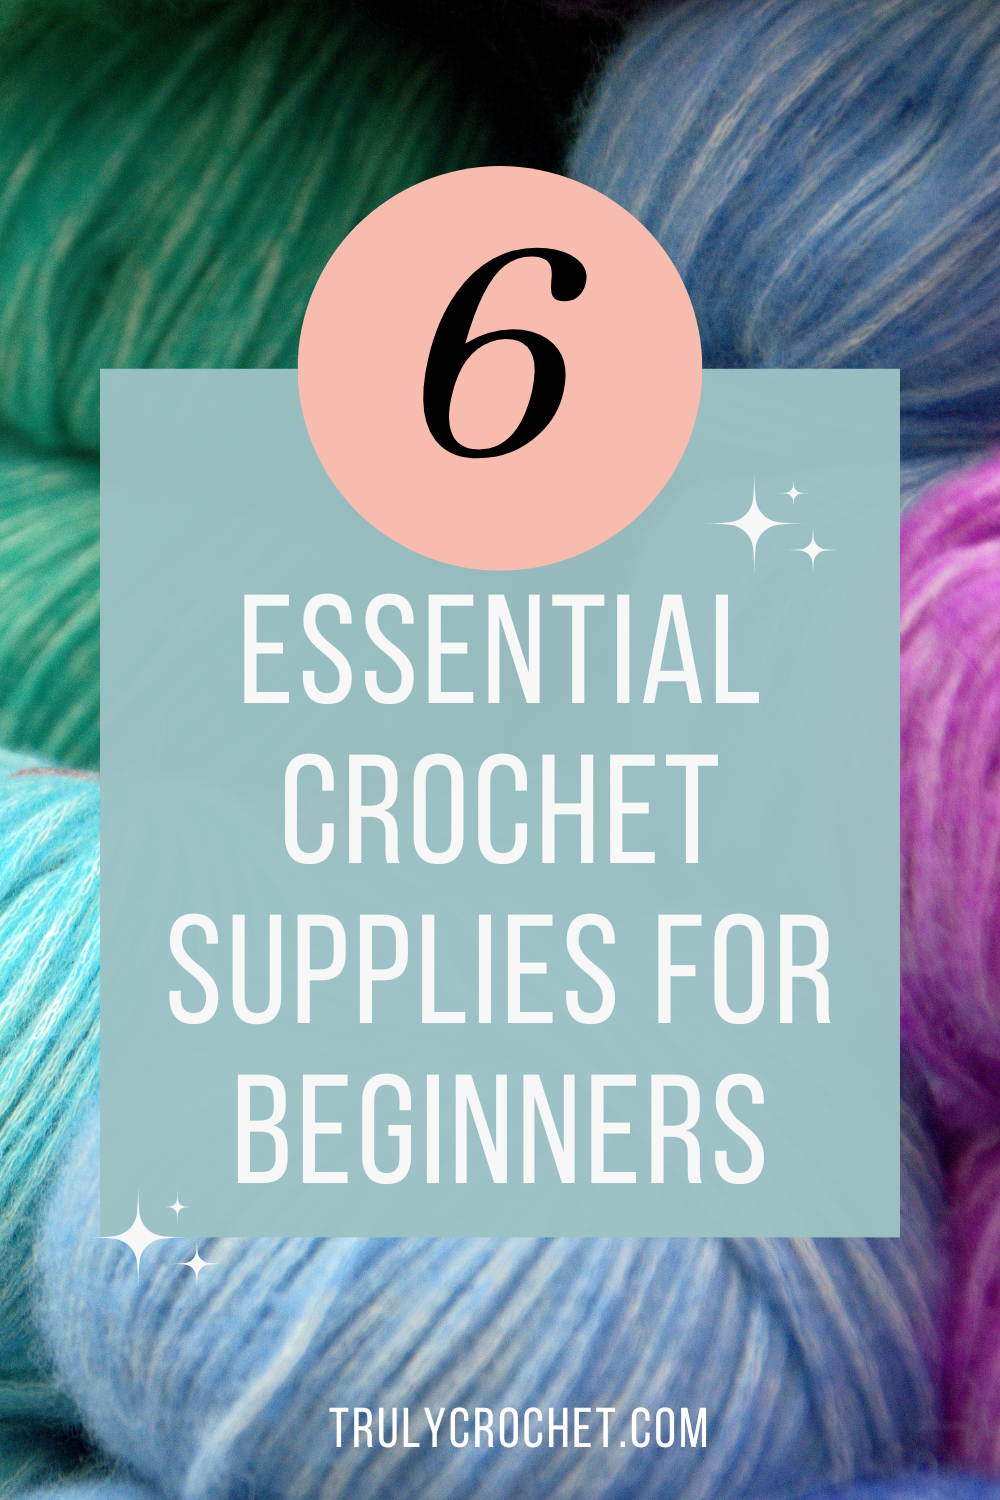 19 Crochet Tools Every Beginner Needs and Wants